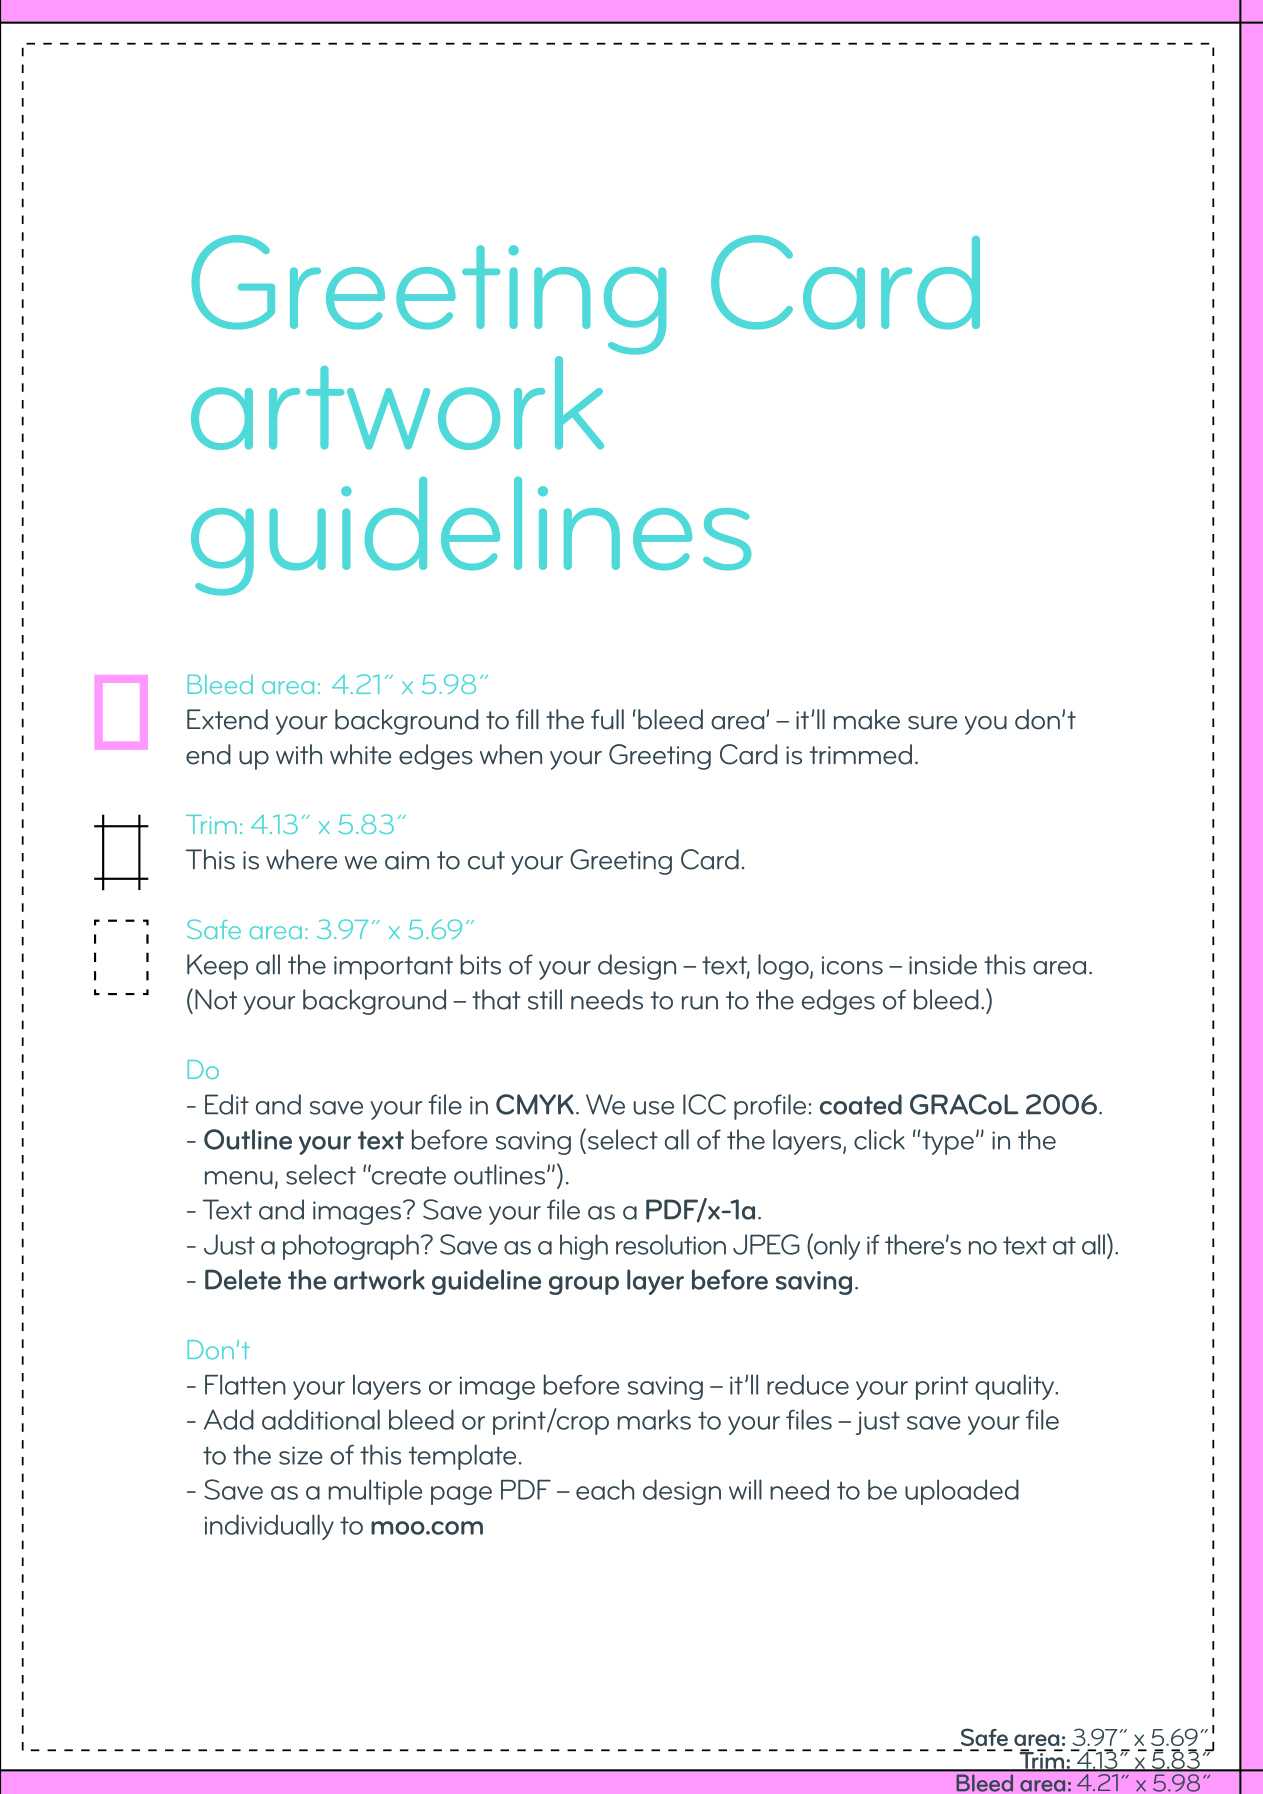 Greeting Card Design Guidelines & Artwork Templates | Moo With Birthday Card Indesign Template